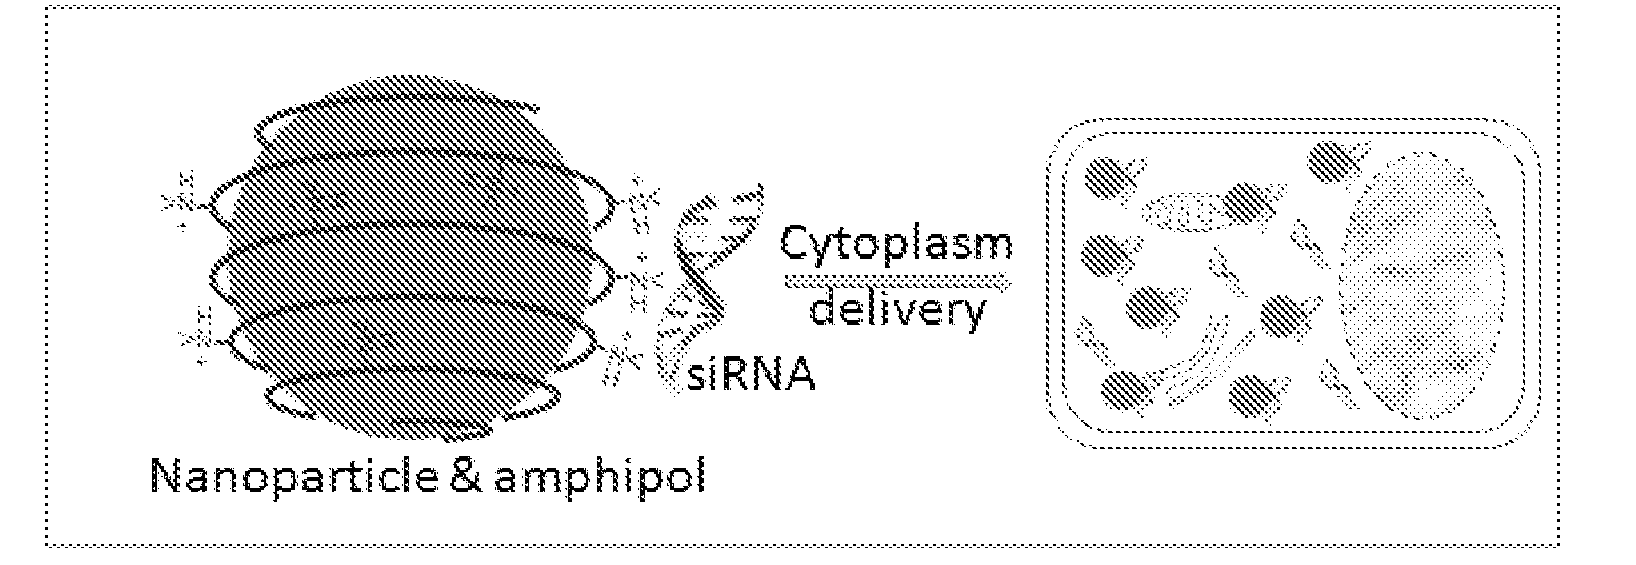 Nanoparticle-amphipol complexes for nucleic acid intracellular delivery and imaging